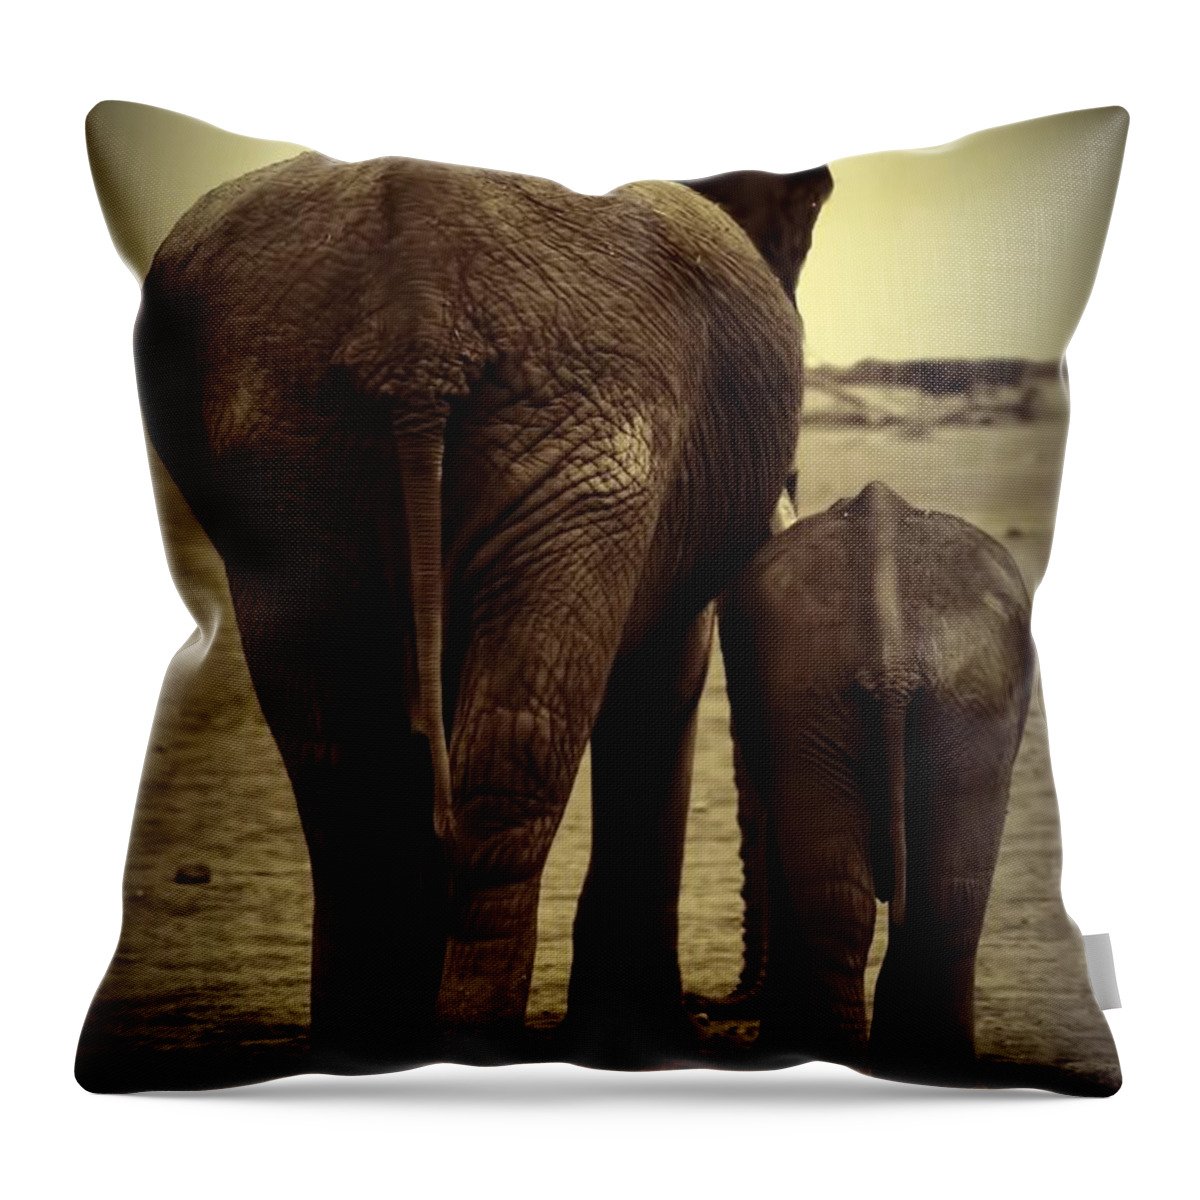 Mother And Baby Elephant Throw Pillow featuring the photograph Mother And Baby Elephant In Black And White by Amanda Stadther